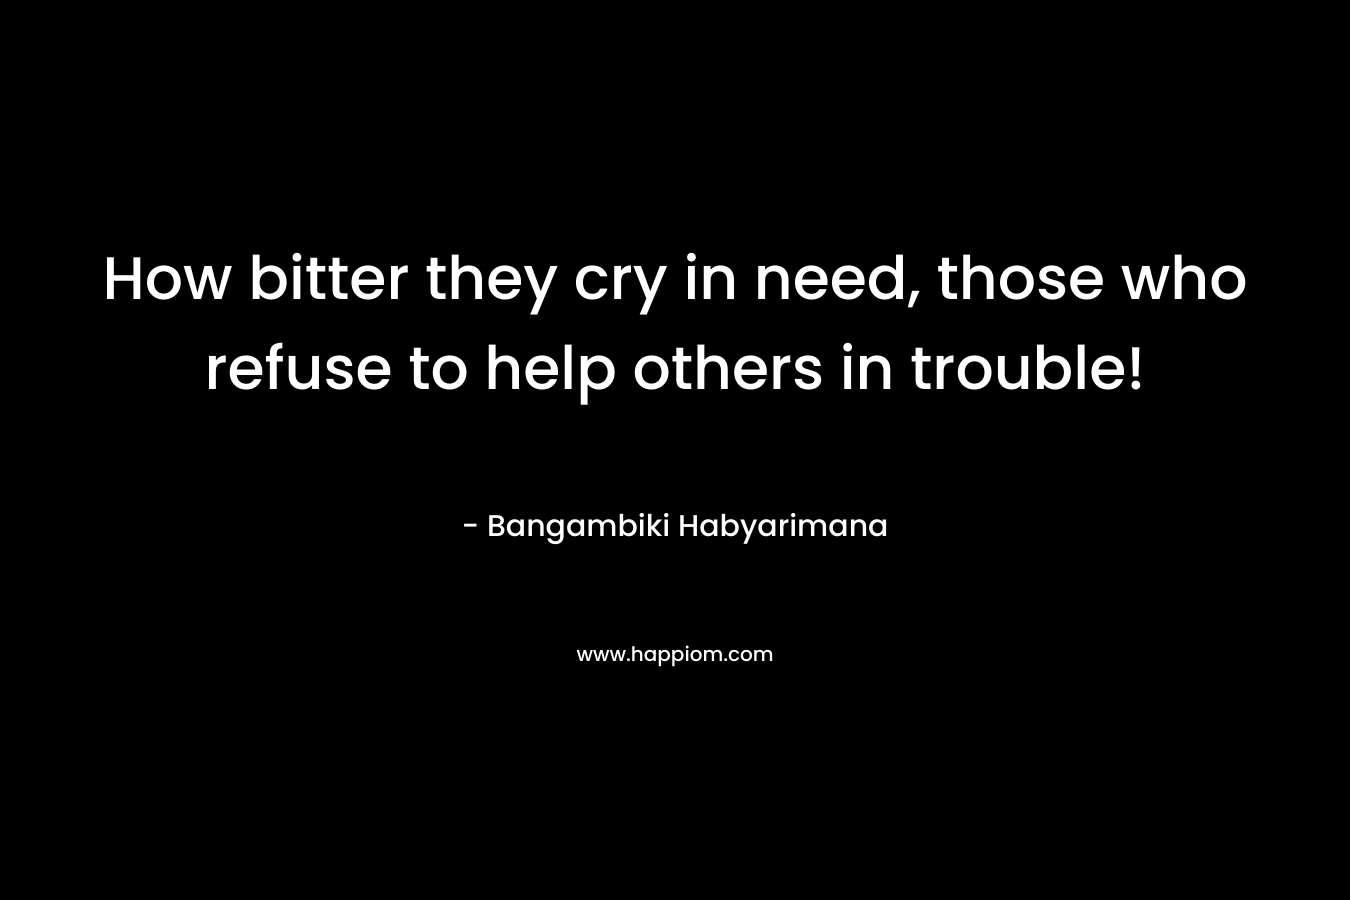 How bitter they cry in need, those who refuse to help others in trouble!